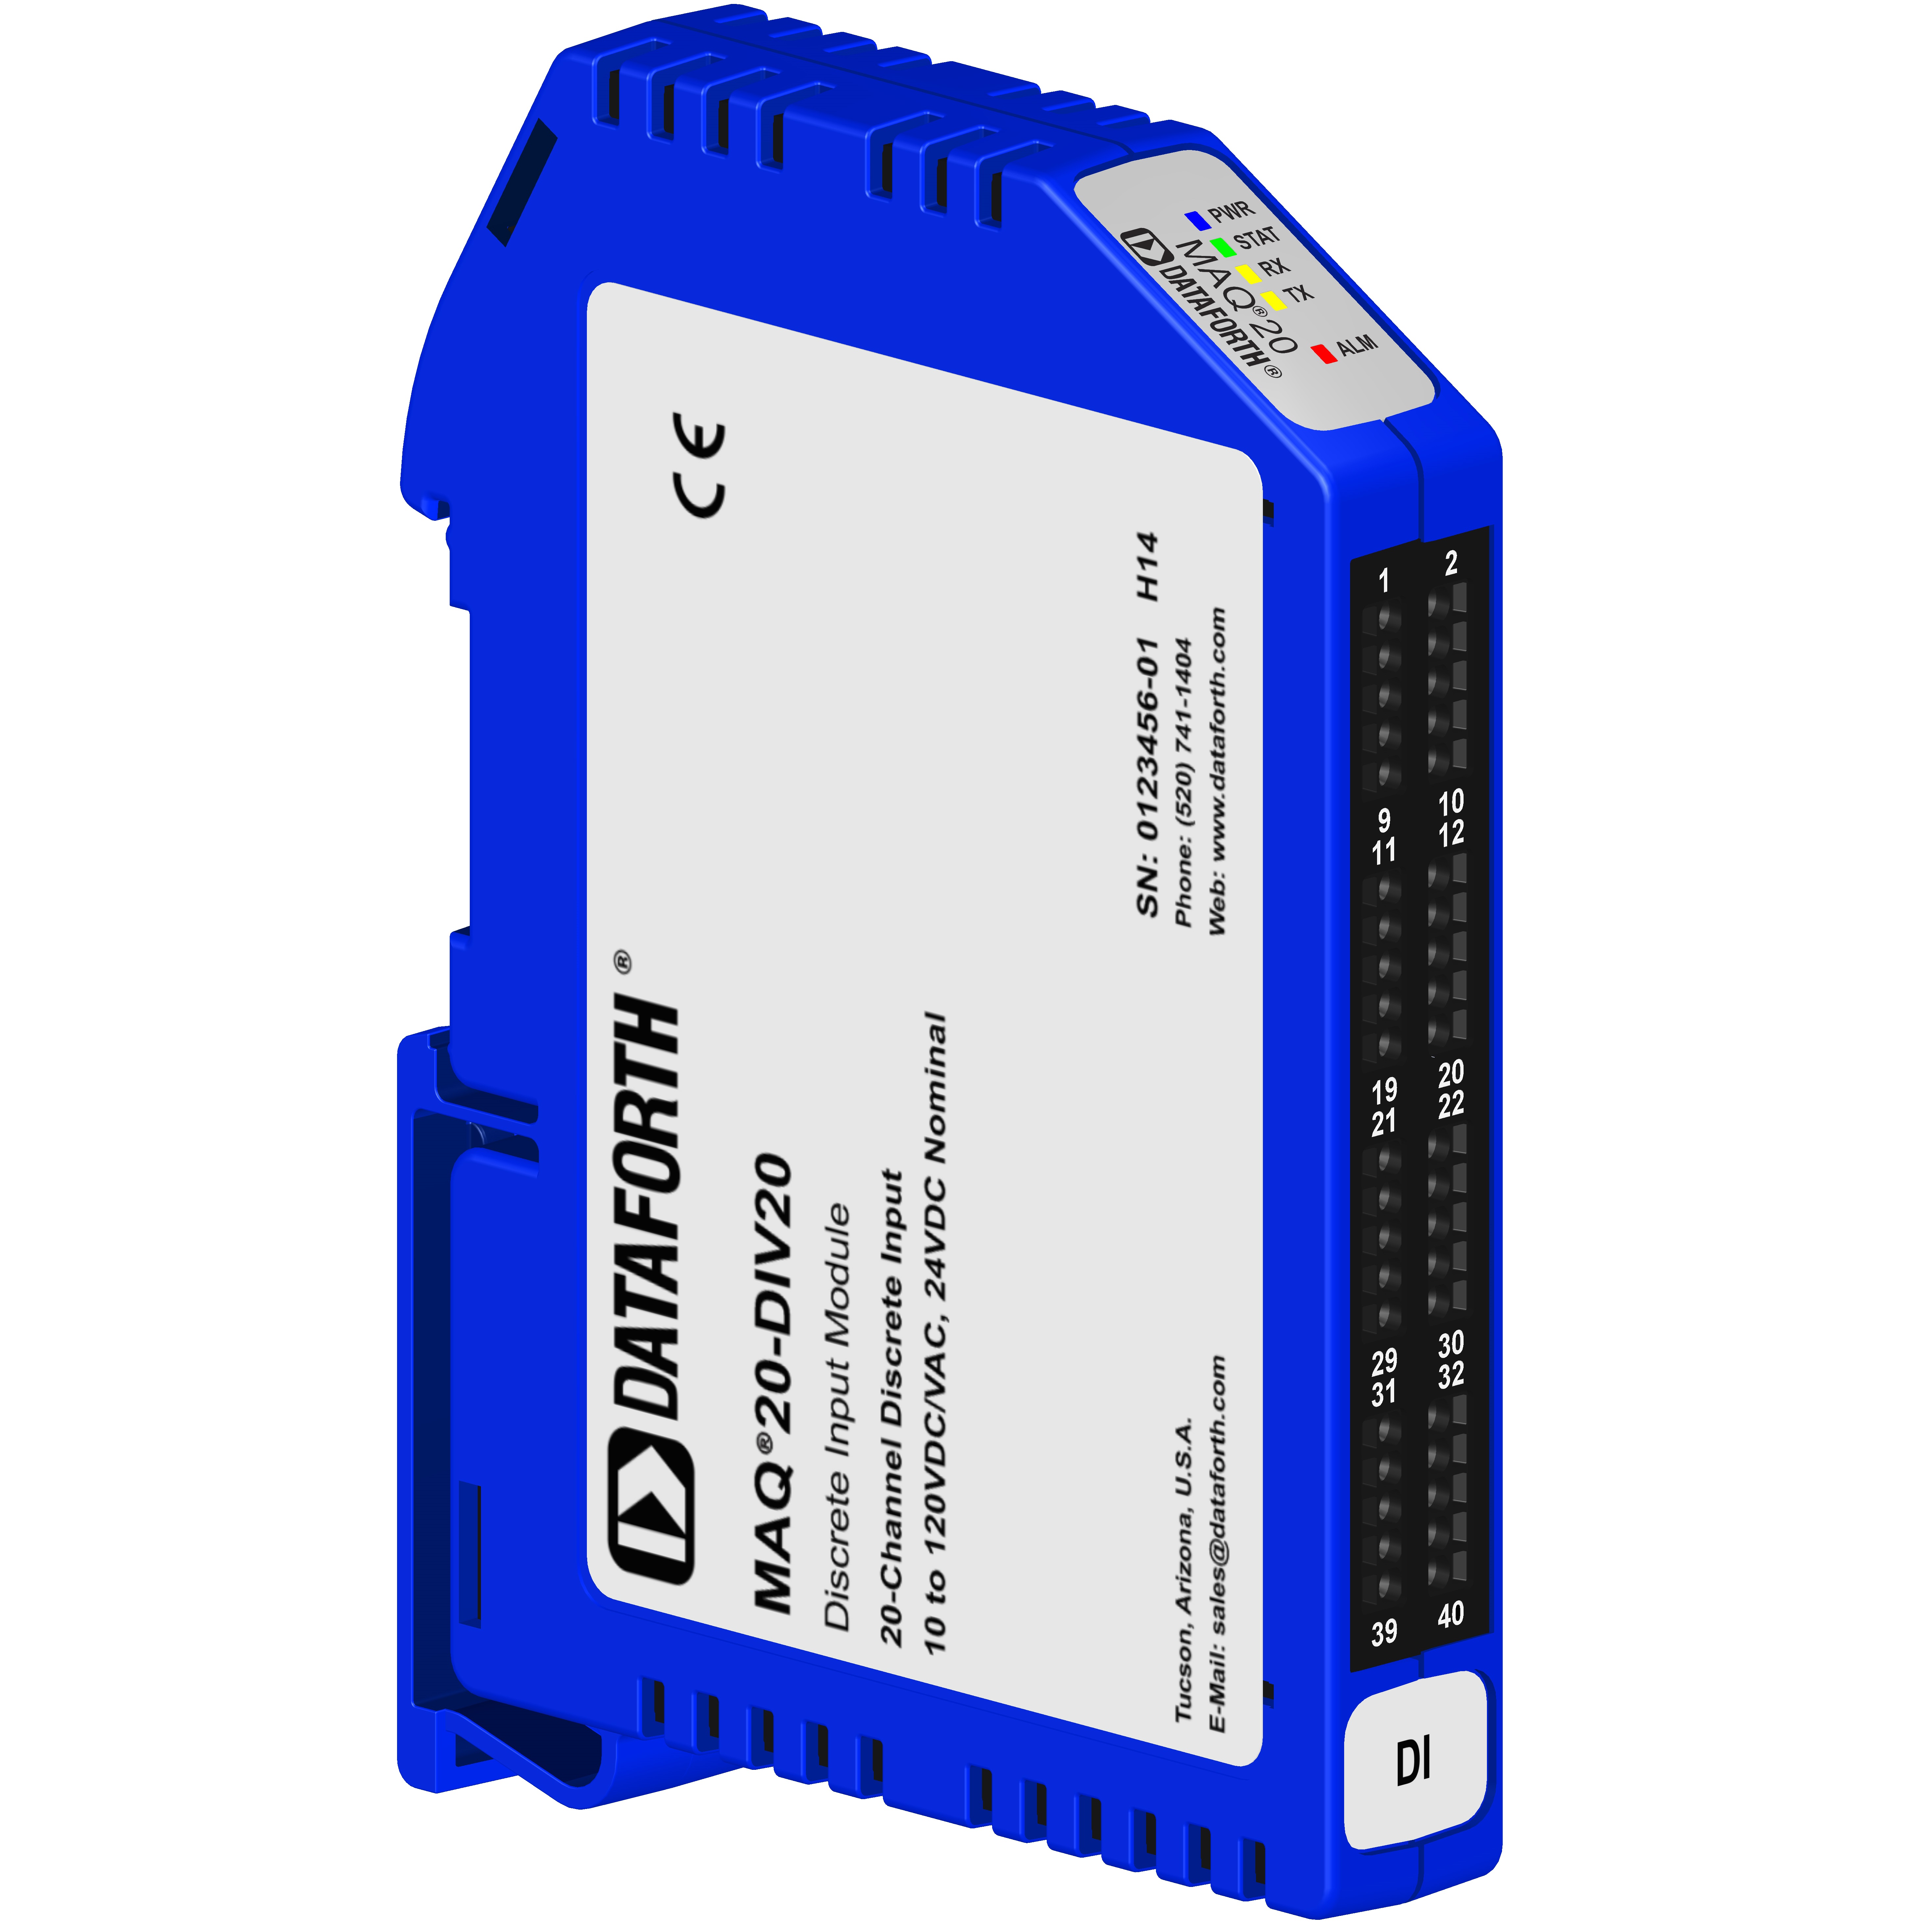 Dataforth Adds Two New Modules to MAQ 20 Data Acquisition & Control System